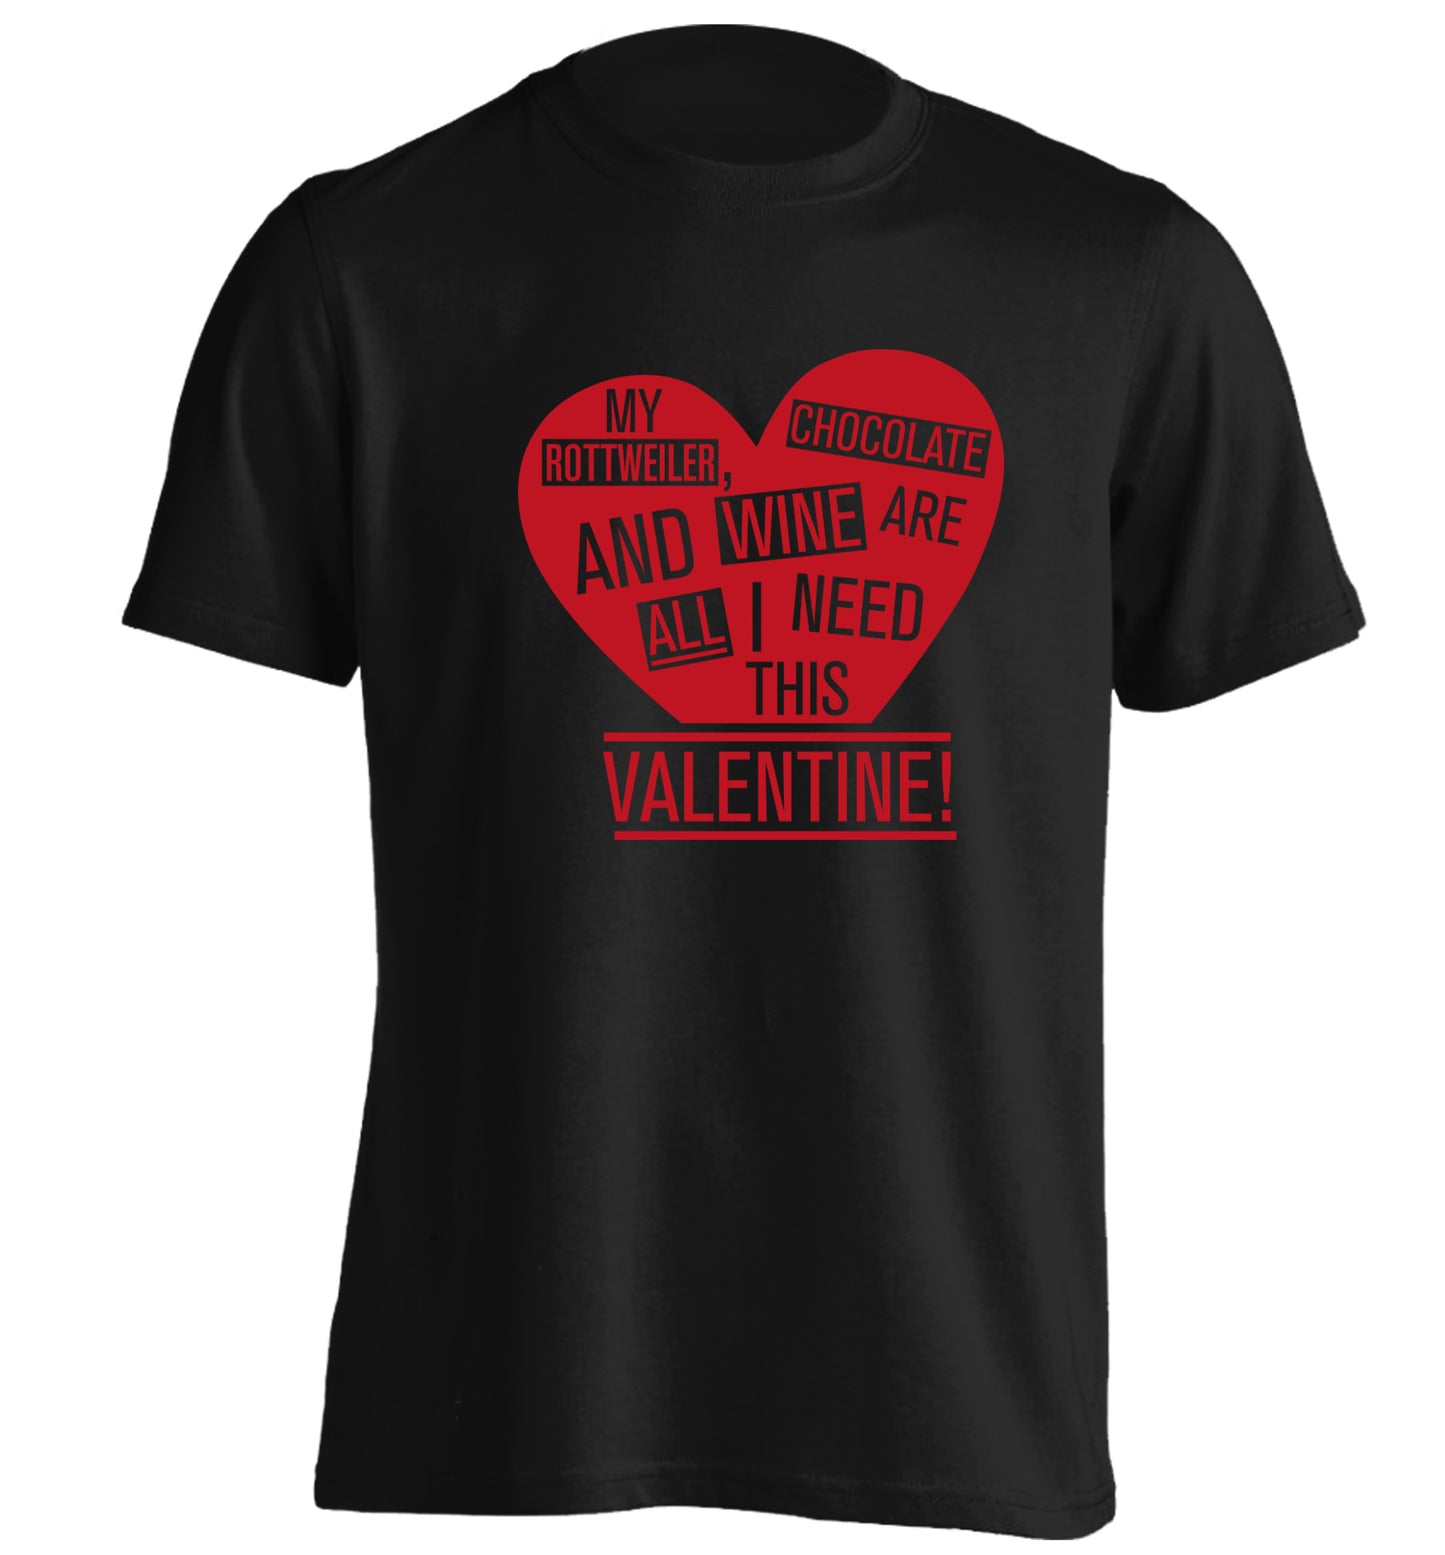 My rottweiler, chocolate and wine are all I need this valentine! adults unisex black Tshirt 2XL